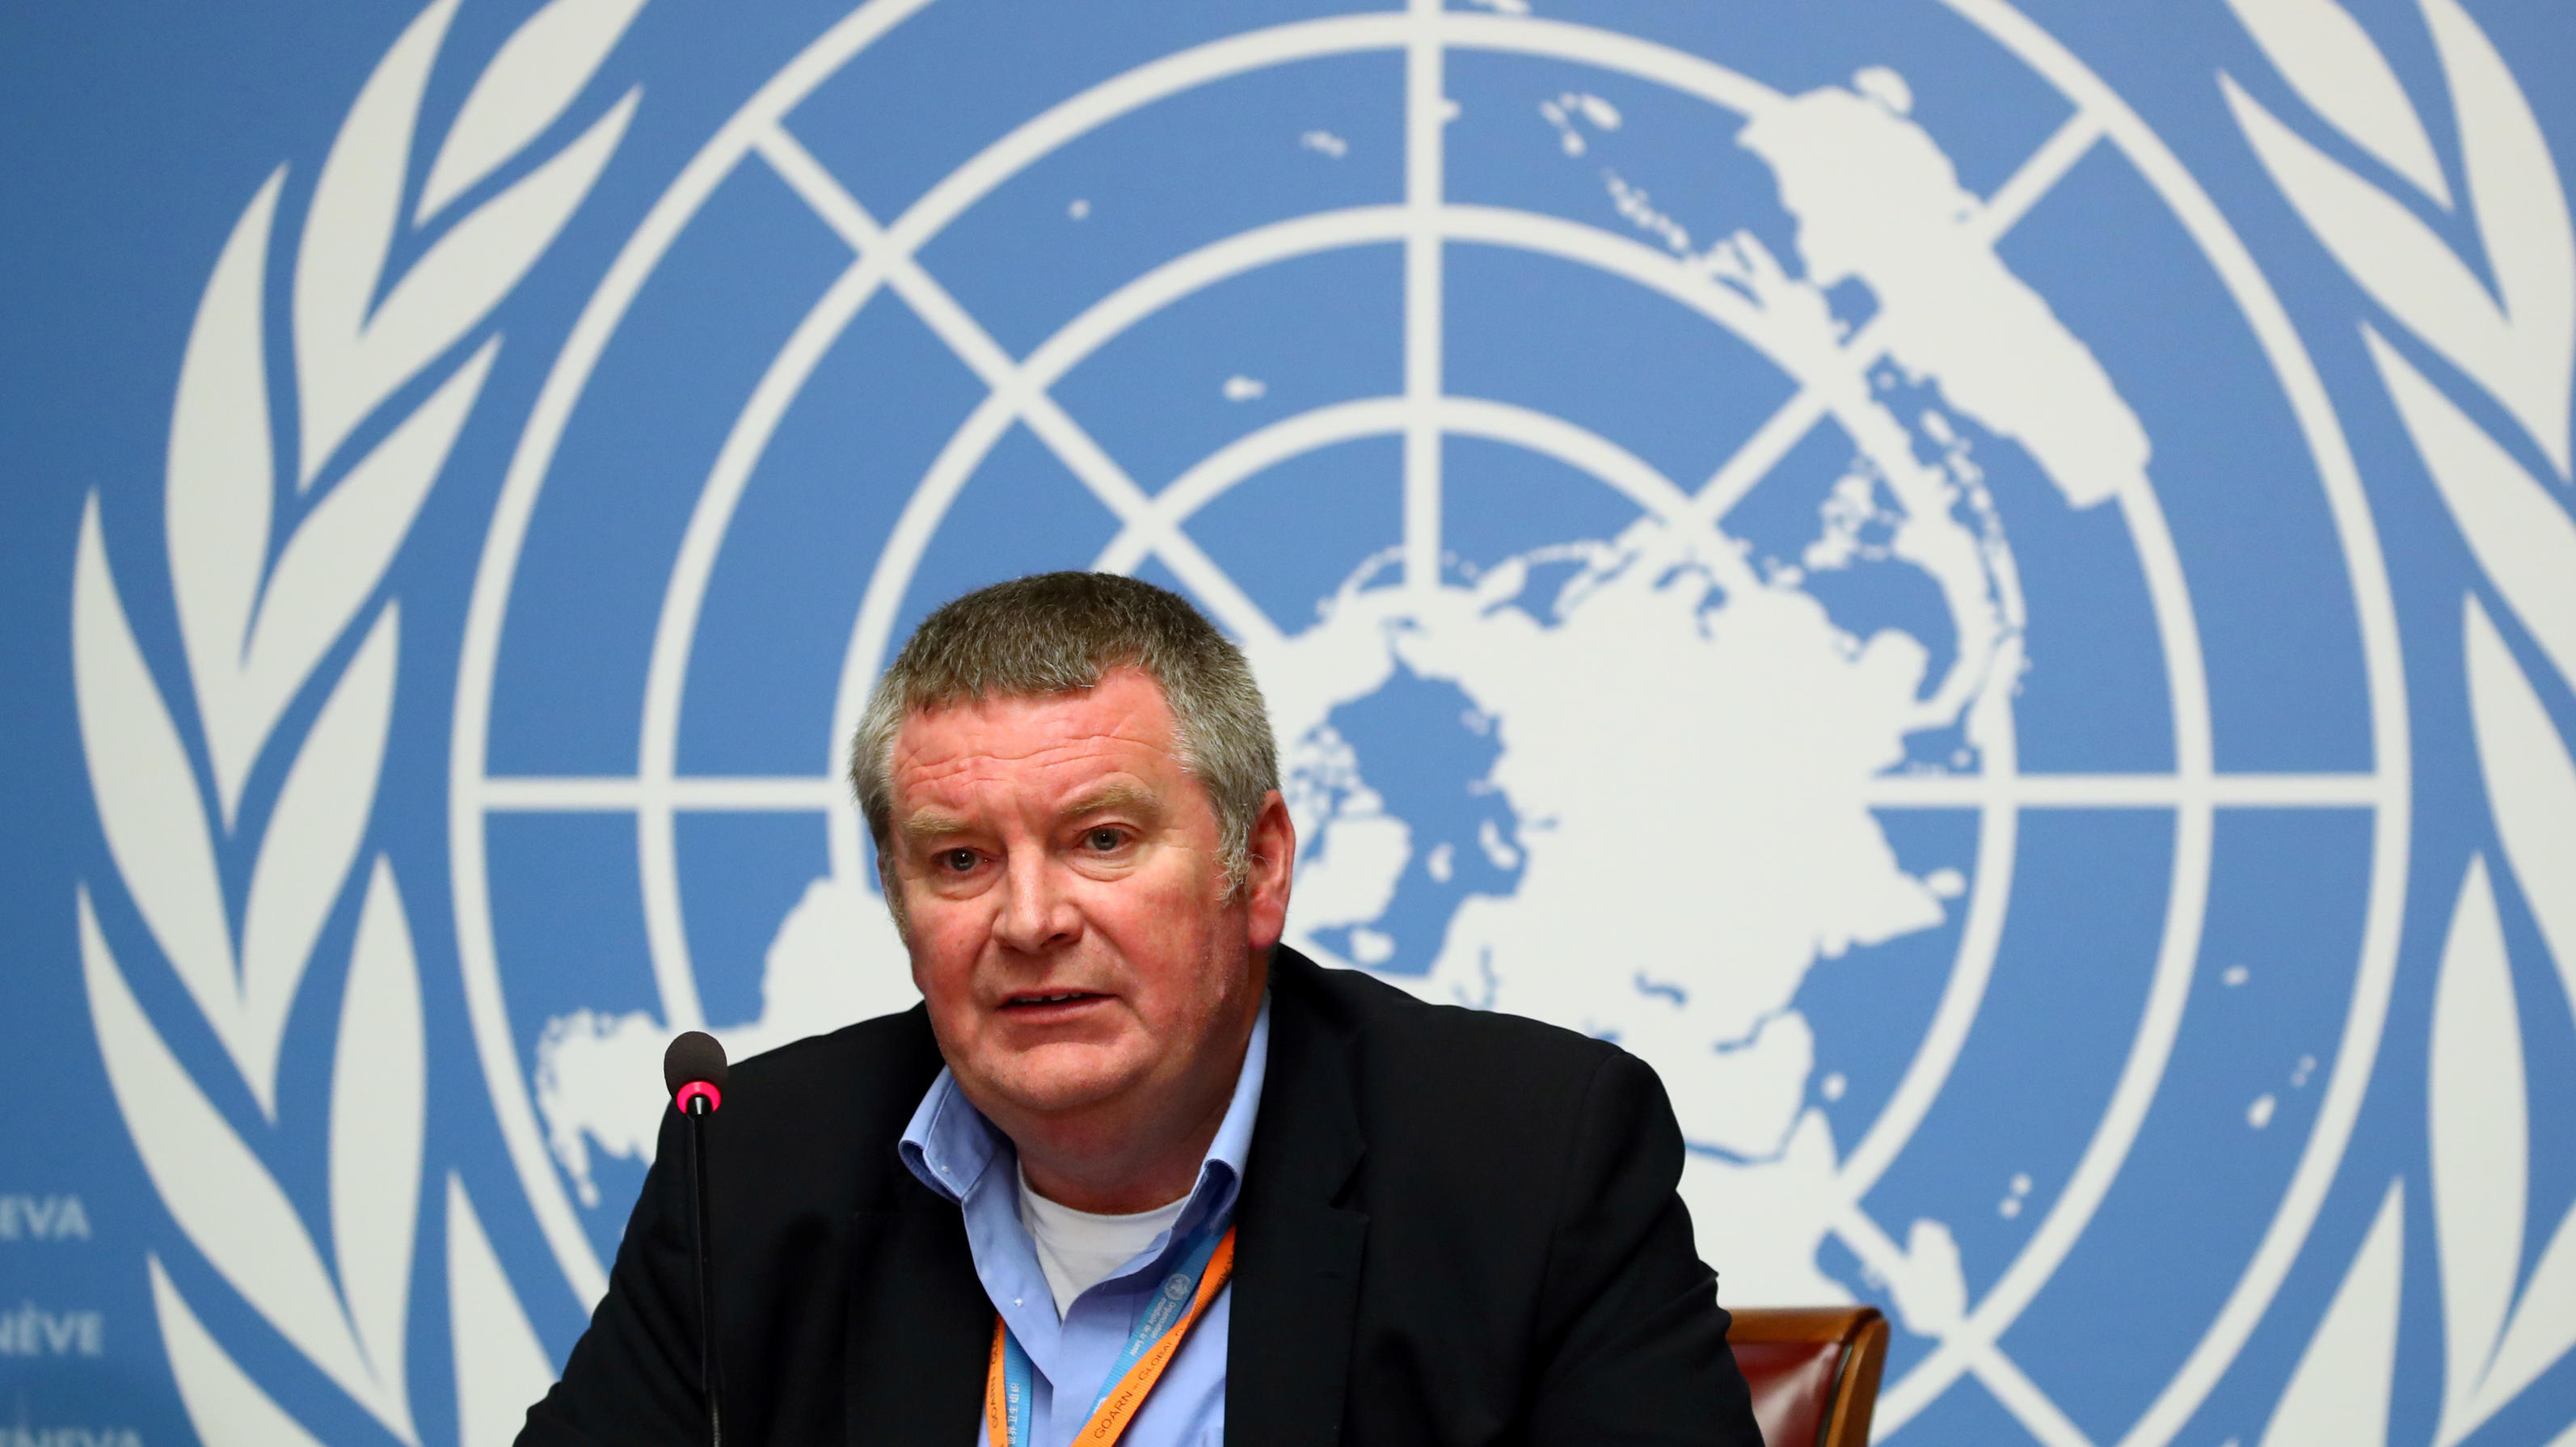 FILE PHOTO: Mike Ryan, Executive Director of the World Health Organisation (WHO), attends a news conference  at the United Nations in Geneva, Switzerland May 3, 2019. REUTERS/Denis Balibouse/File Photo